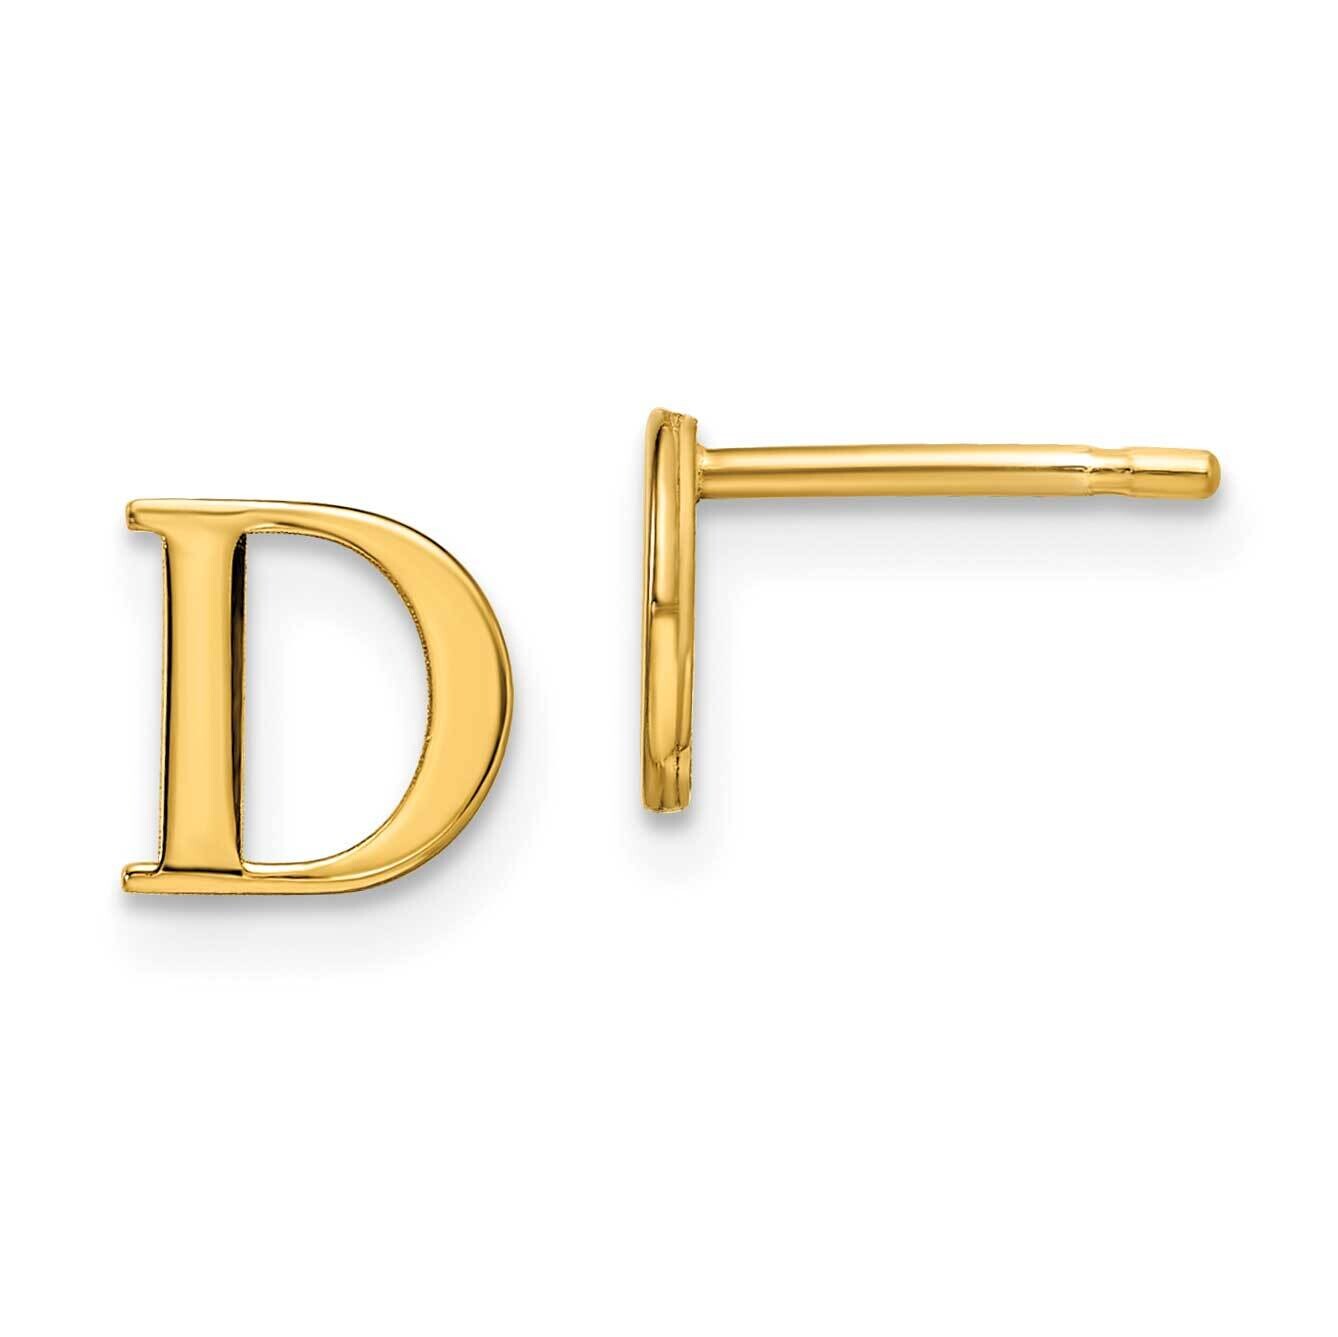 Gold-Plated Letter D Initial Post Earrings Sterling Silver XNE46GP/D